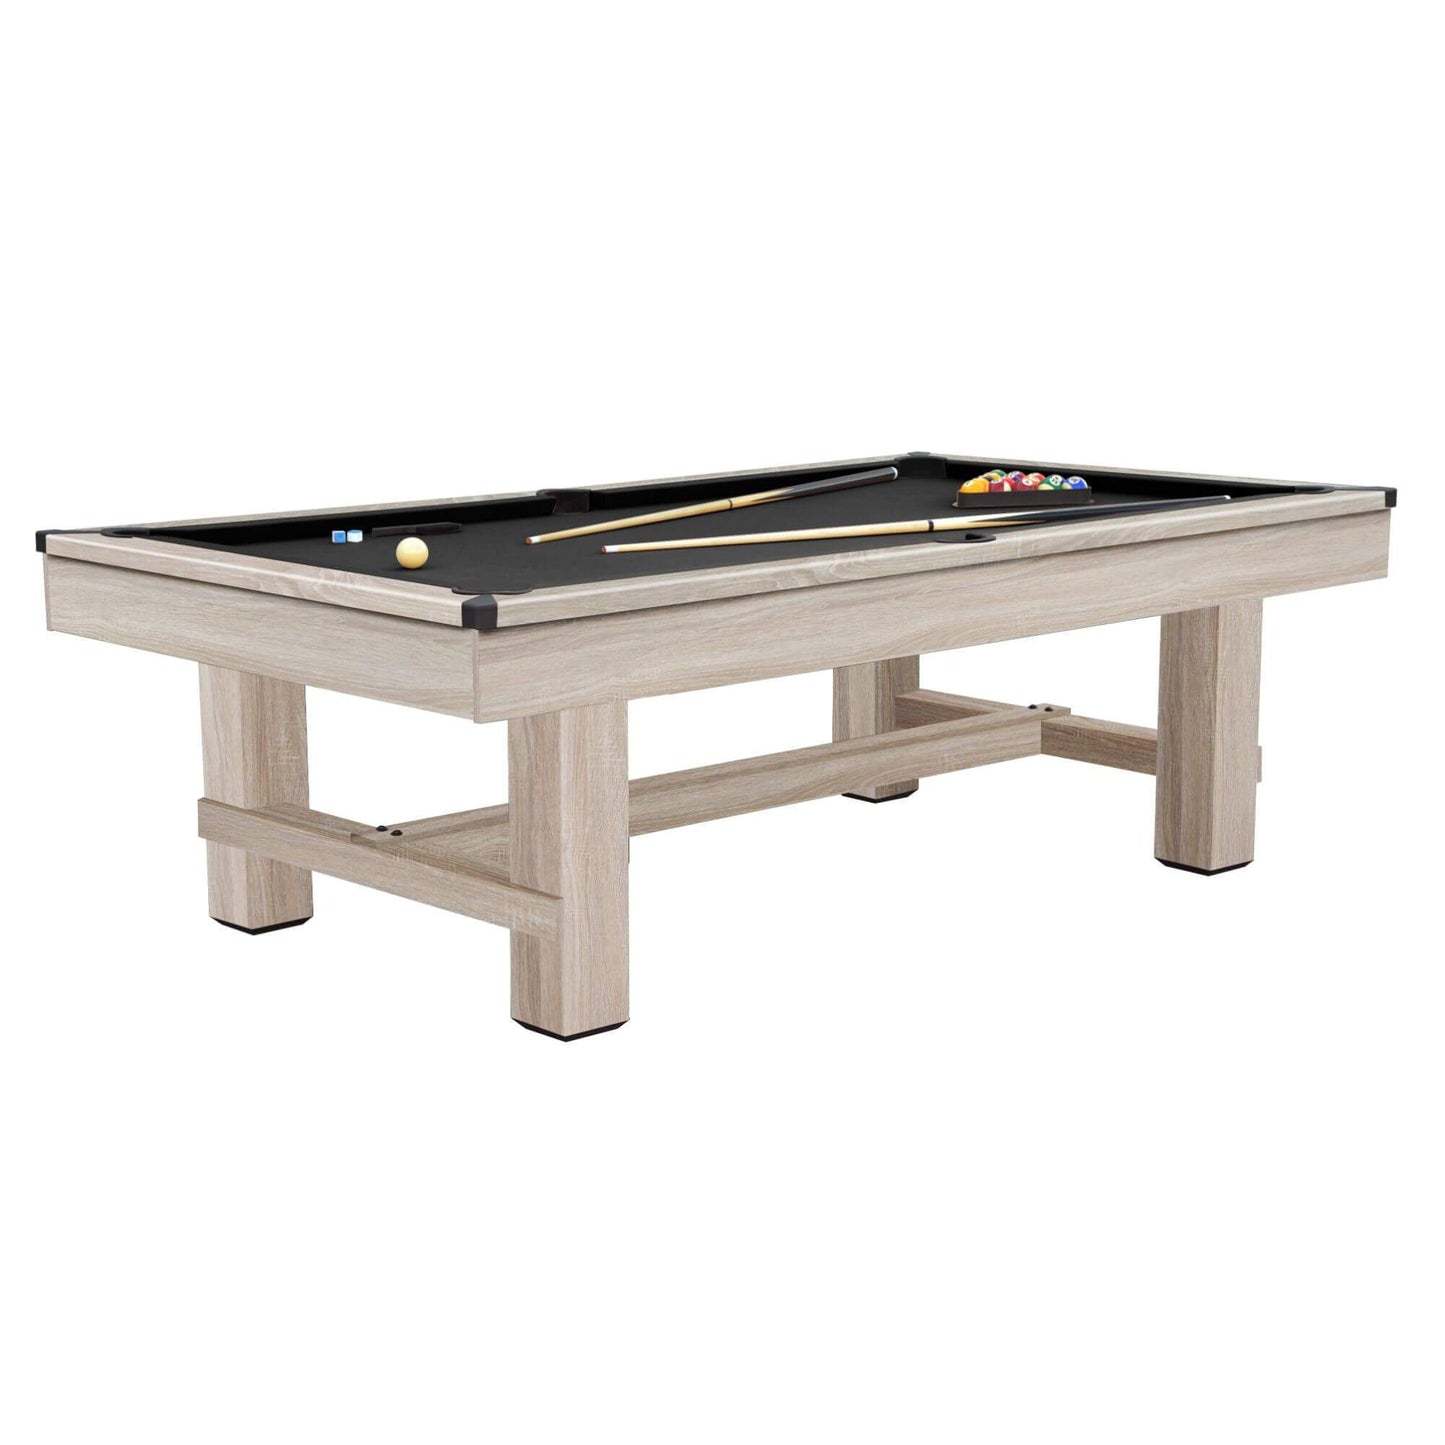 Playcraft Bryce Pool Table with Black Cloth - Gaming Blaze